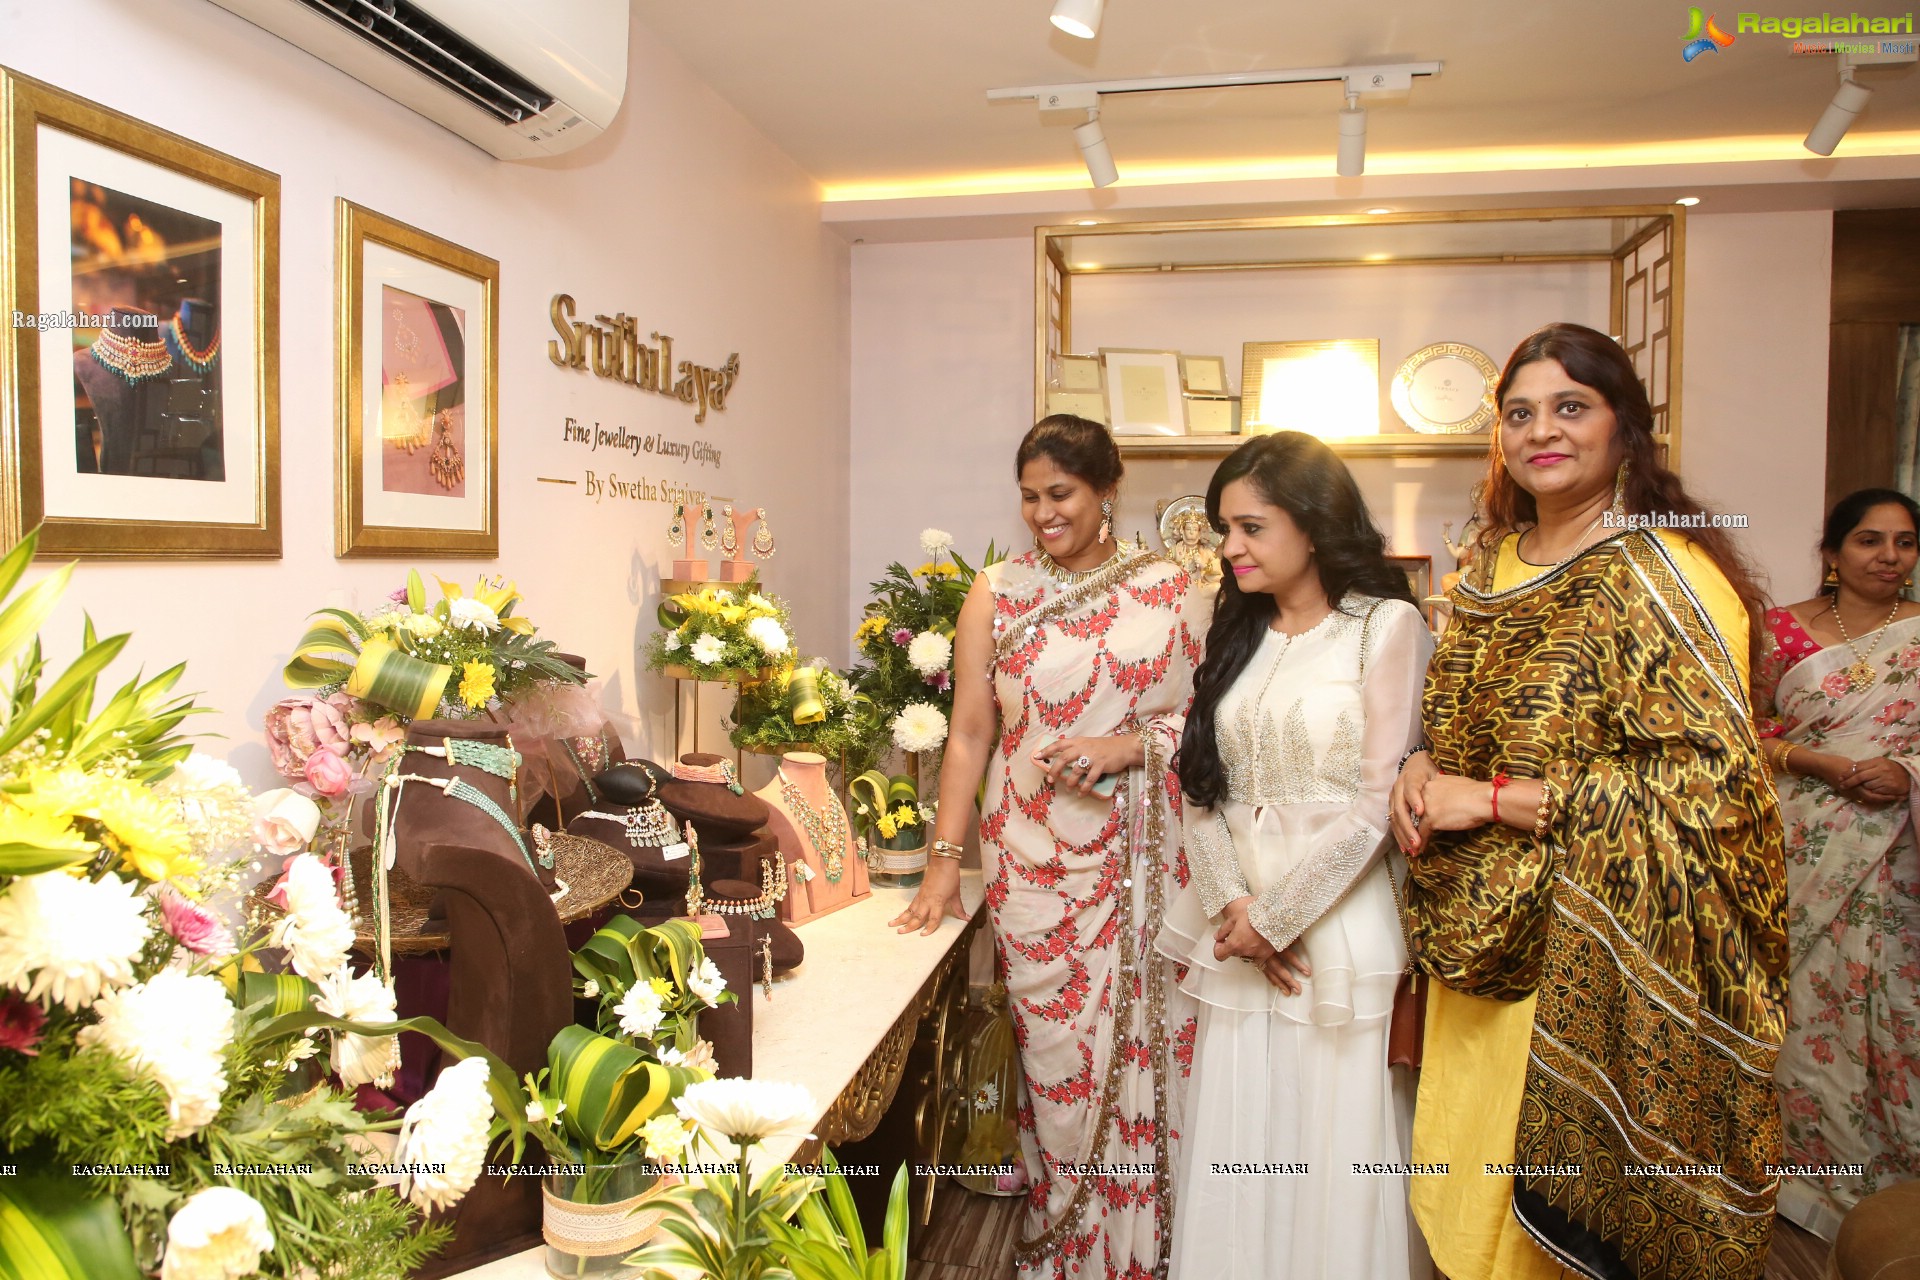 Sruthilaya Fine Jewellery & Luxury Gifting Boutique Launches New Collection